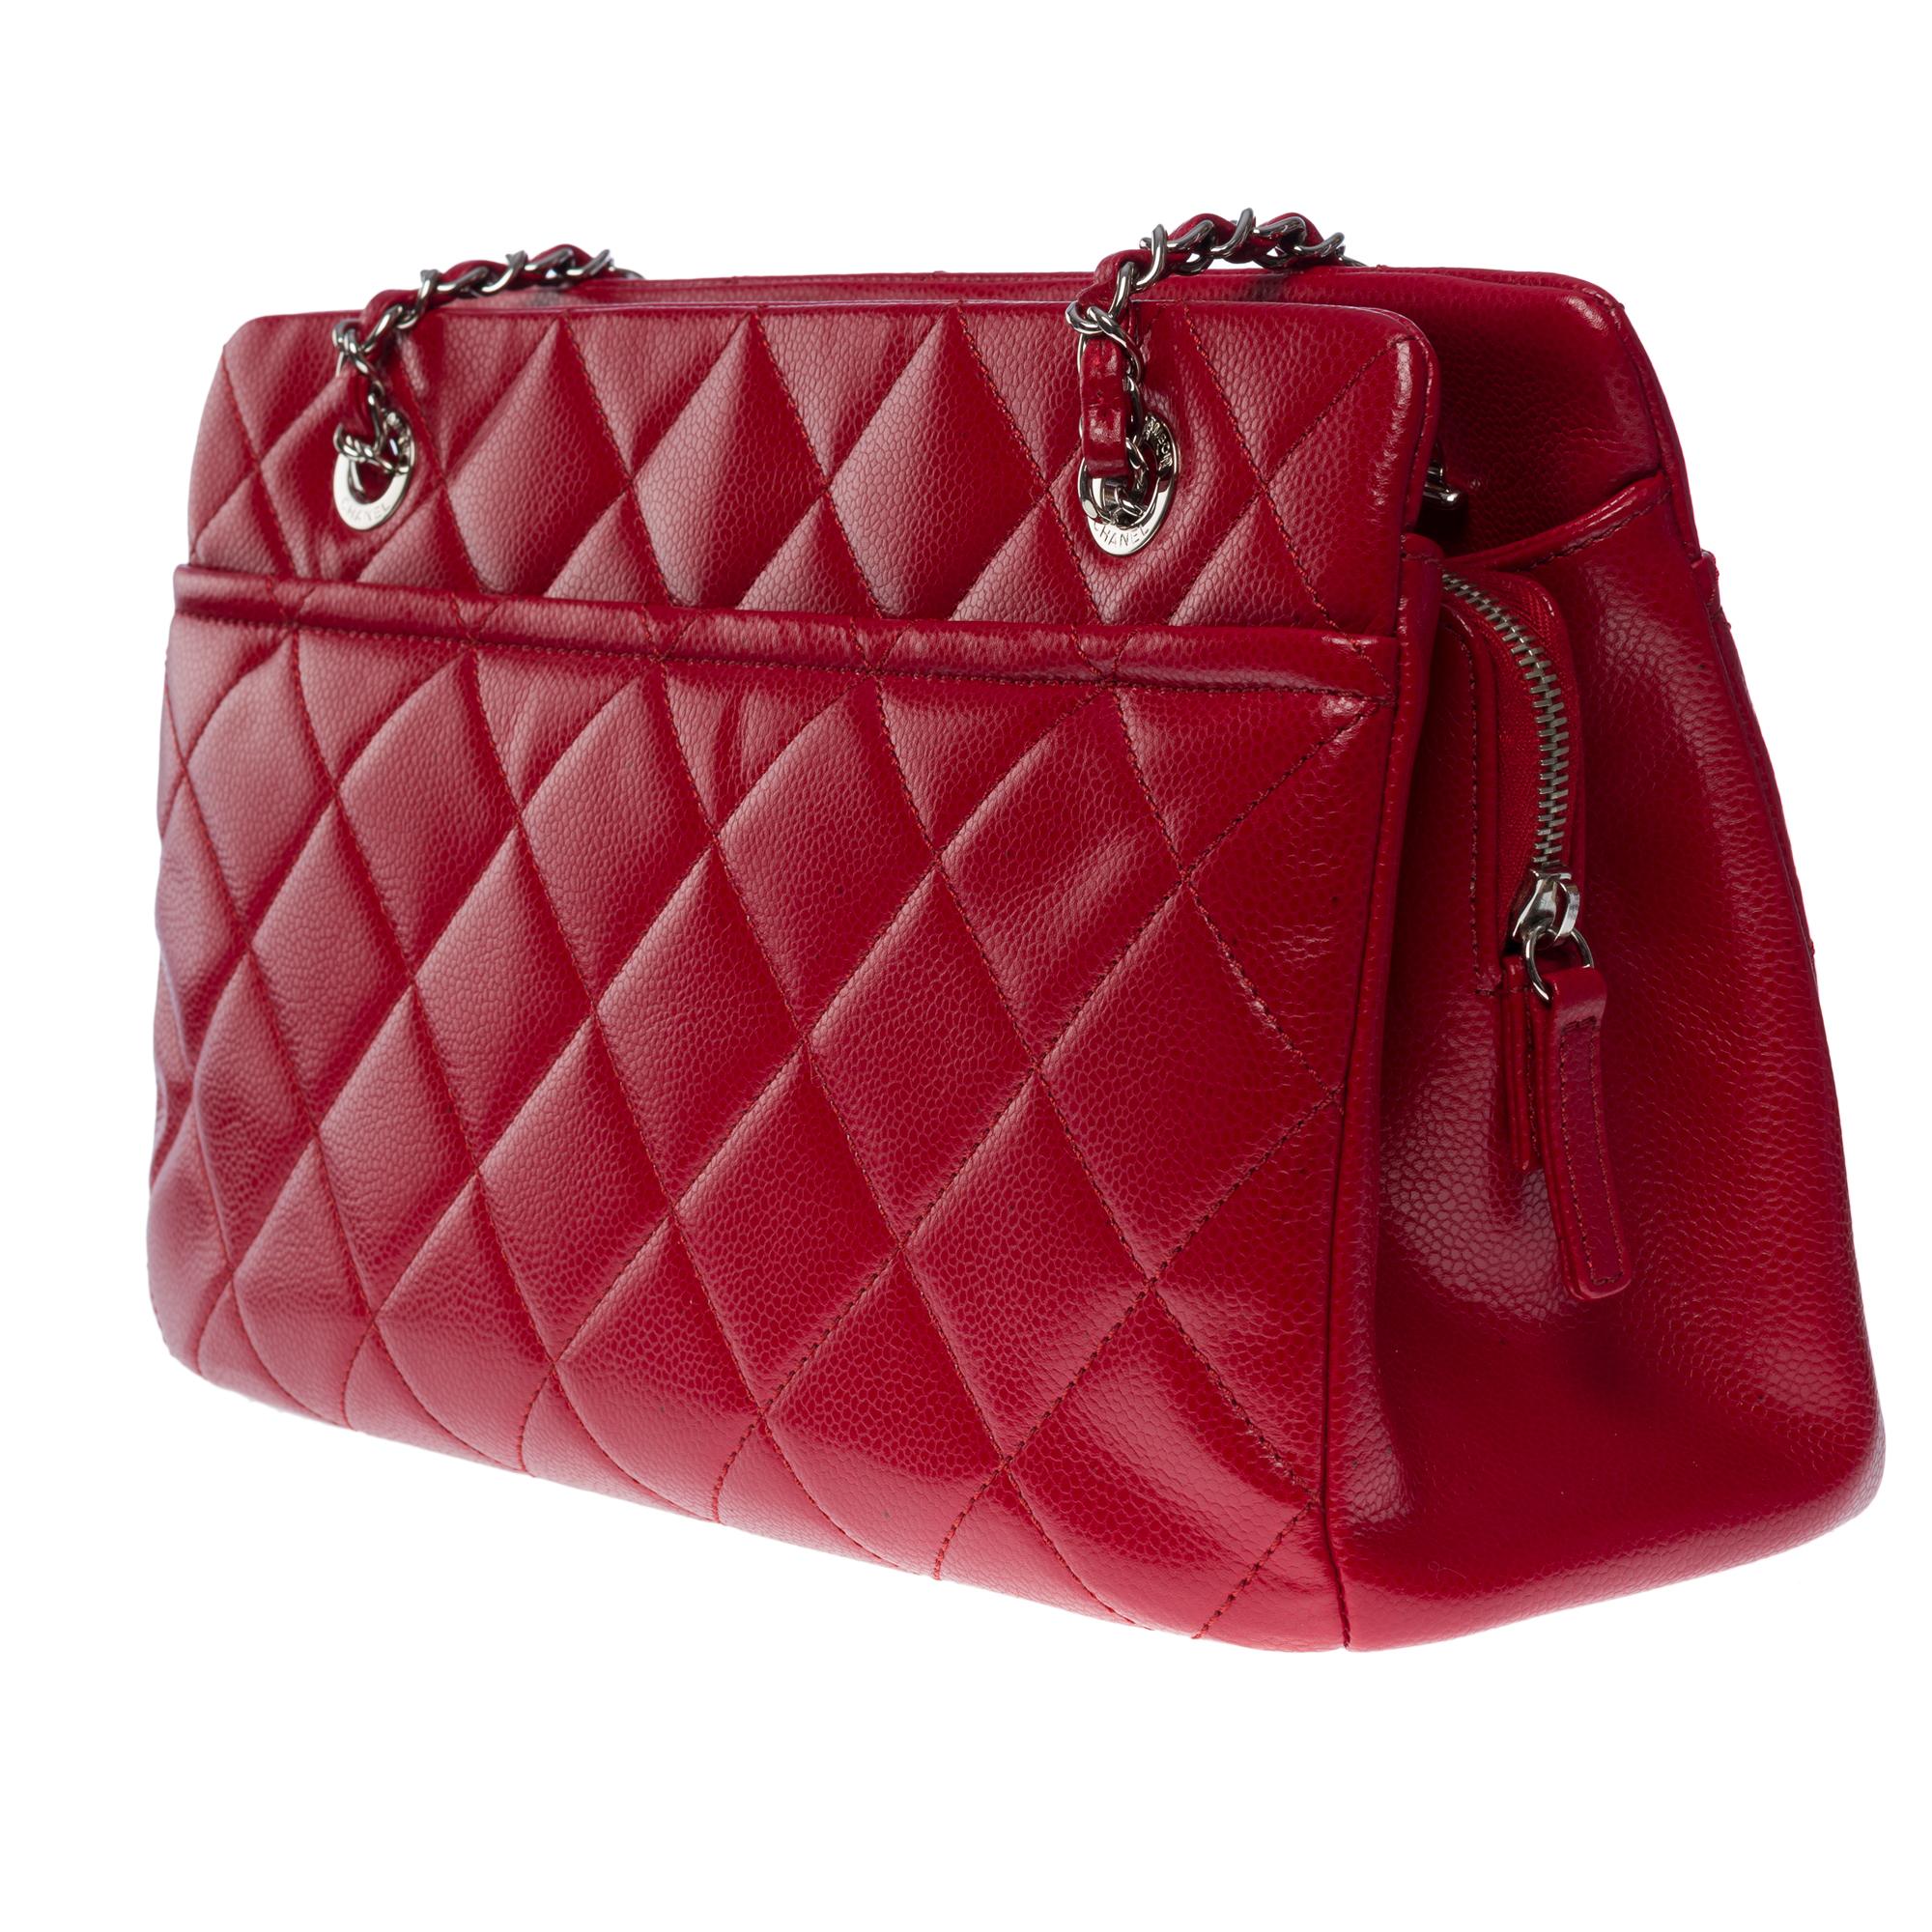 Bright & Amazing Chanel Shopping Tote bag in Red Caviar quilted leather, SHW For Sale 1